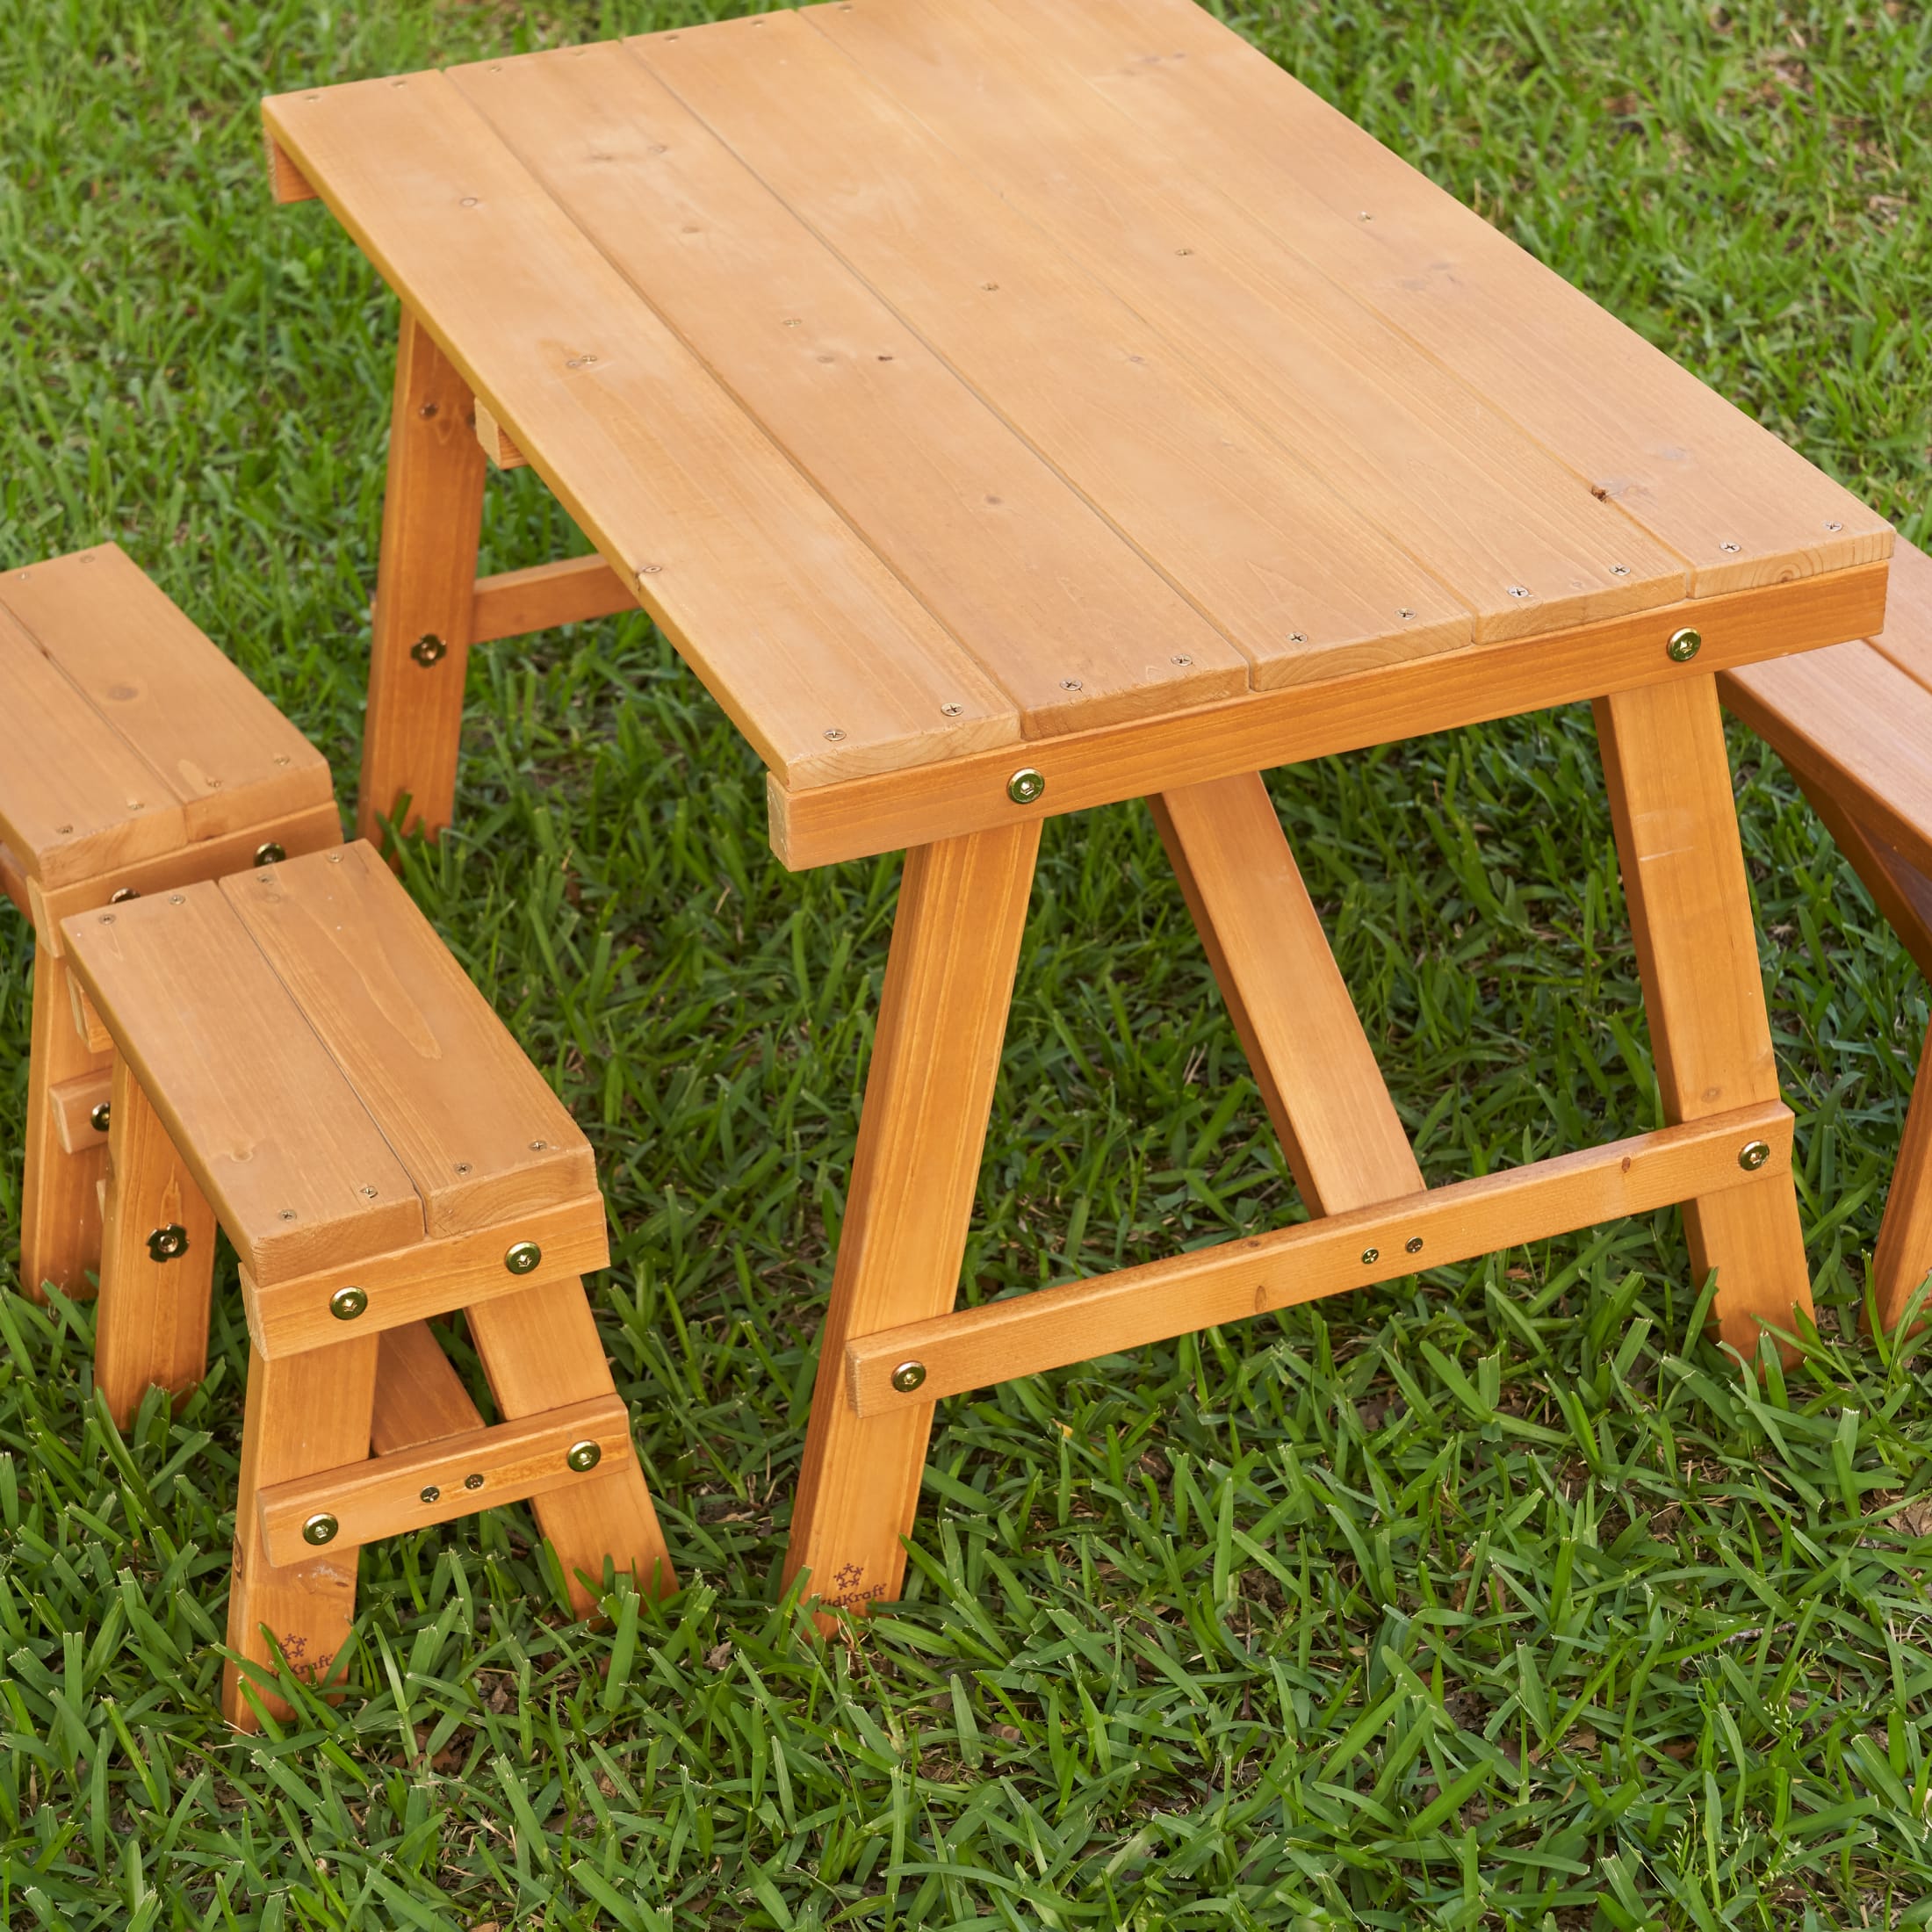 KidKraft Wooden Outdoor Picnic Table with Three Benches, Kids Patio Furniture, Amber - image 2 of 5